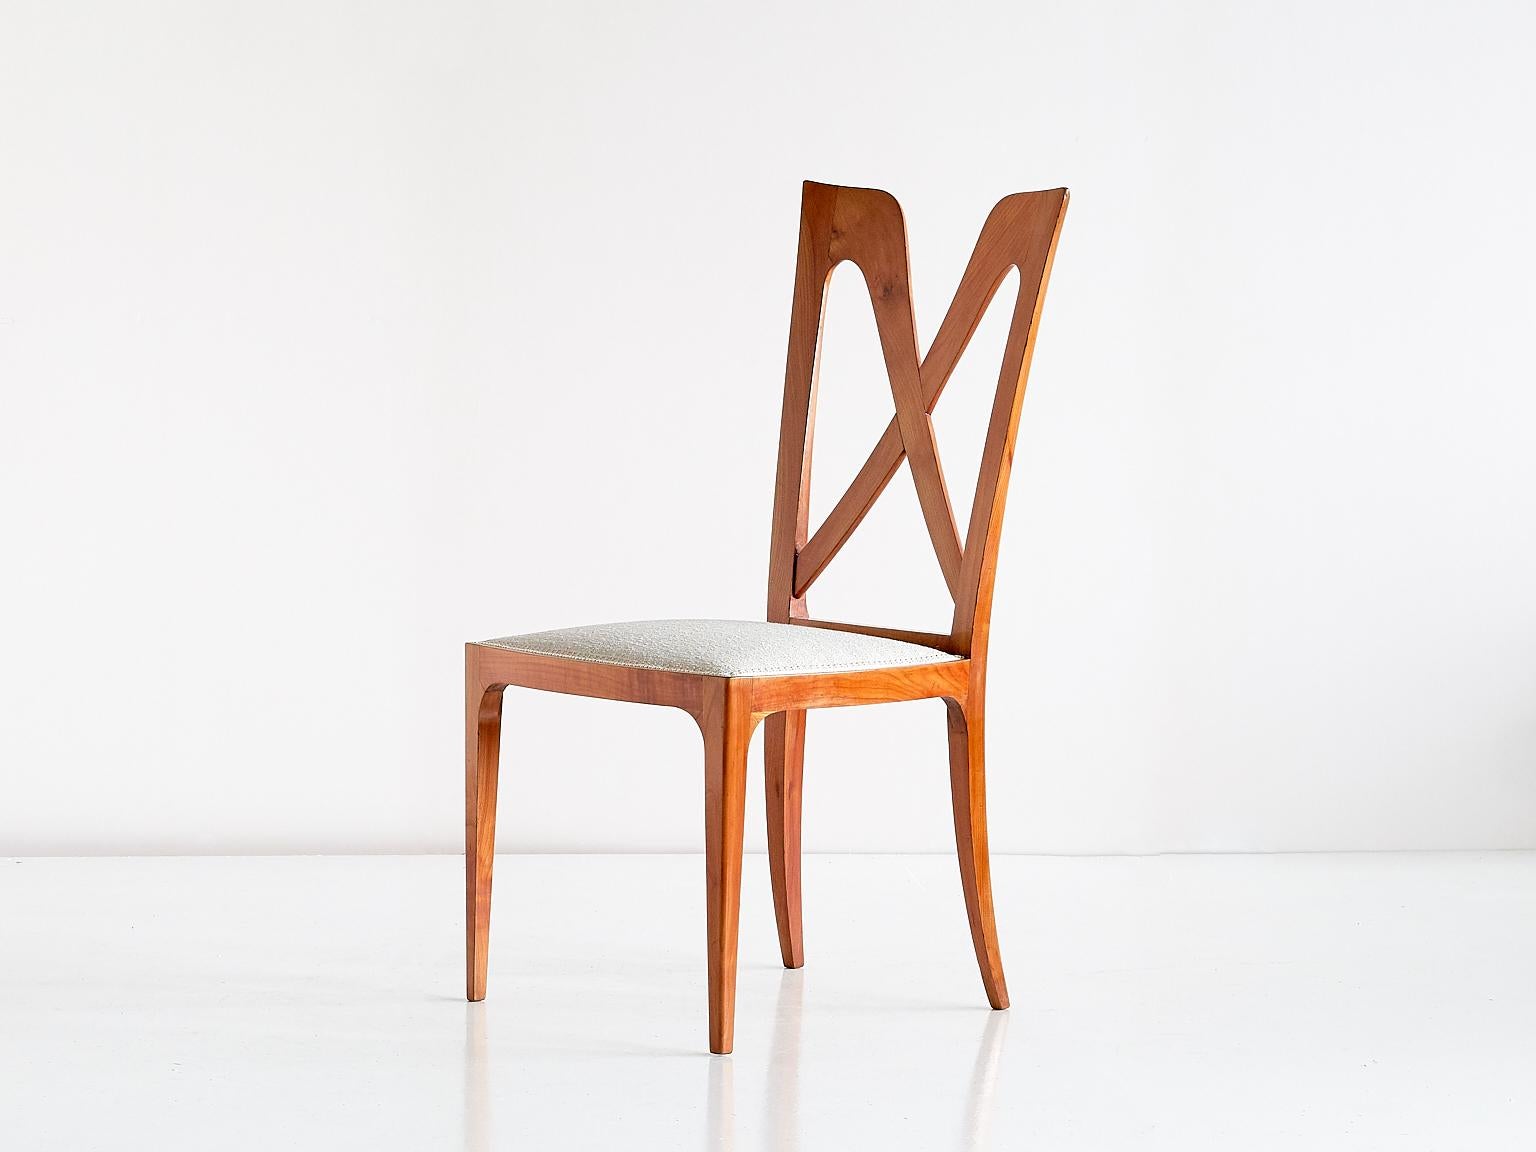 Set of Six Ulderico Carlo Forni Dining Chairs in Cherry Wood, Italy, 1940s For Sale 5